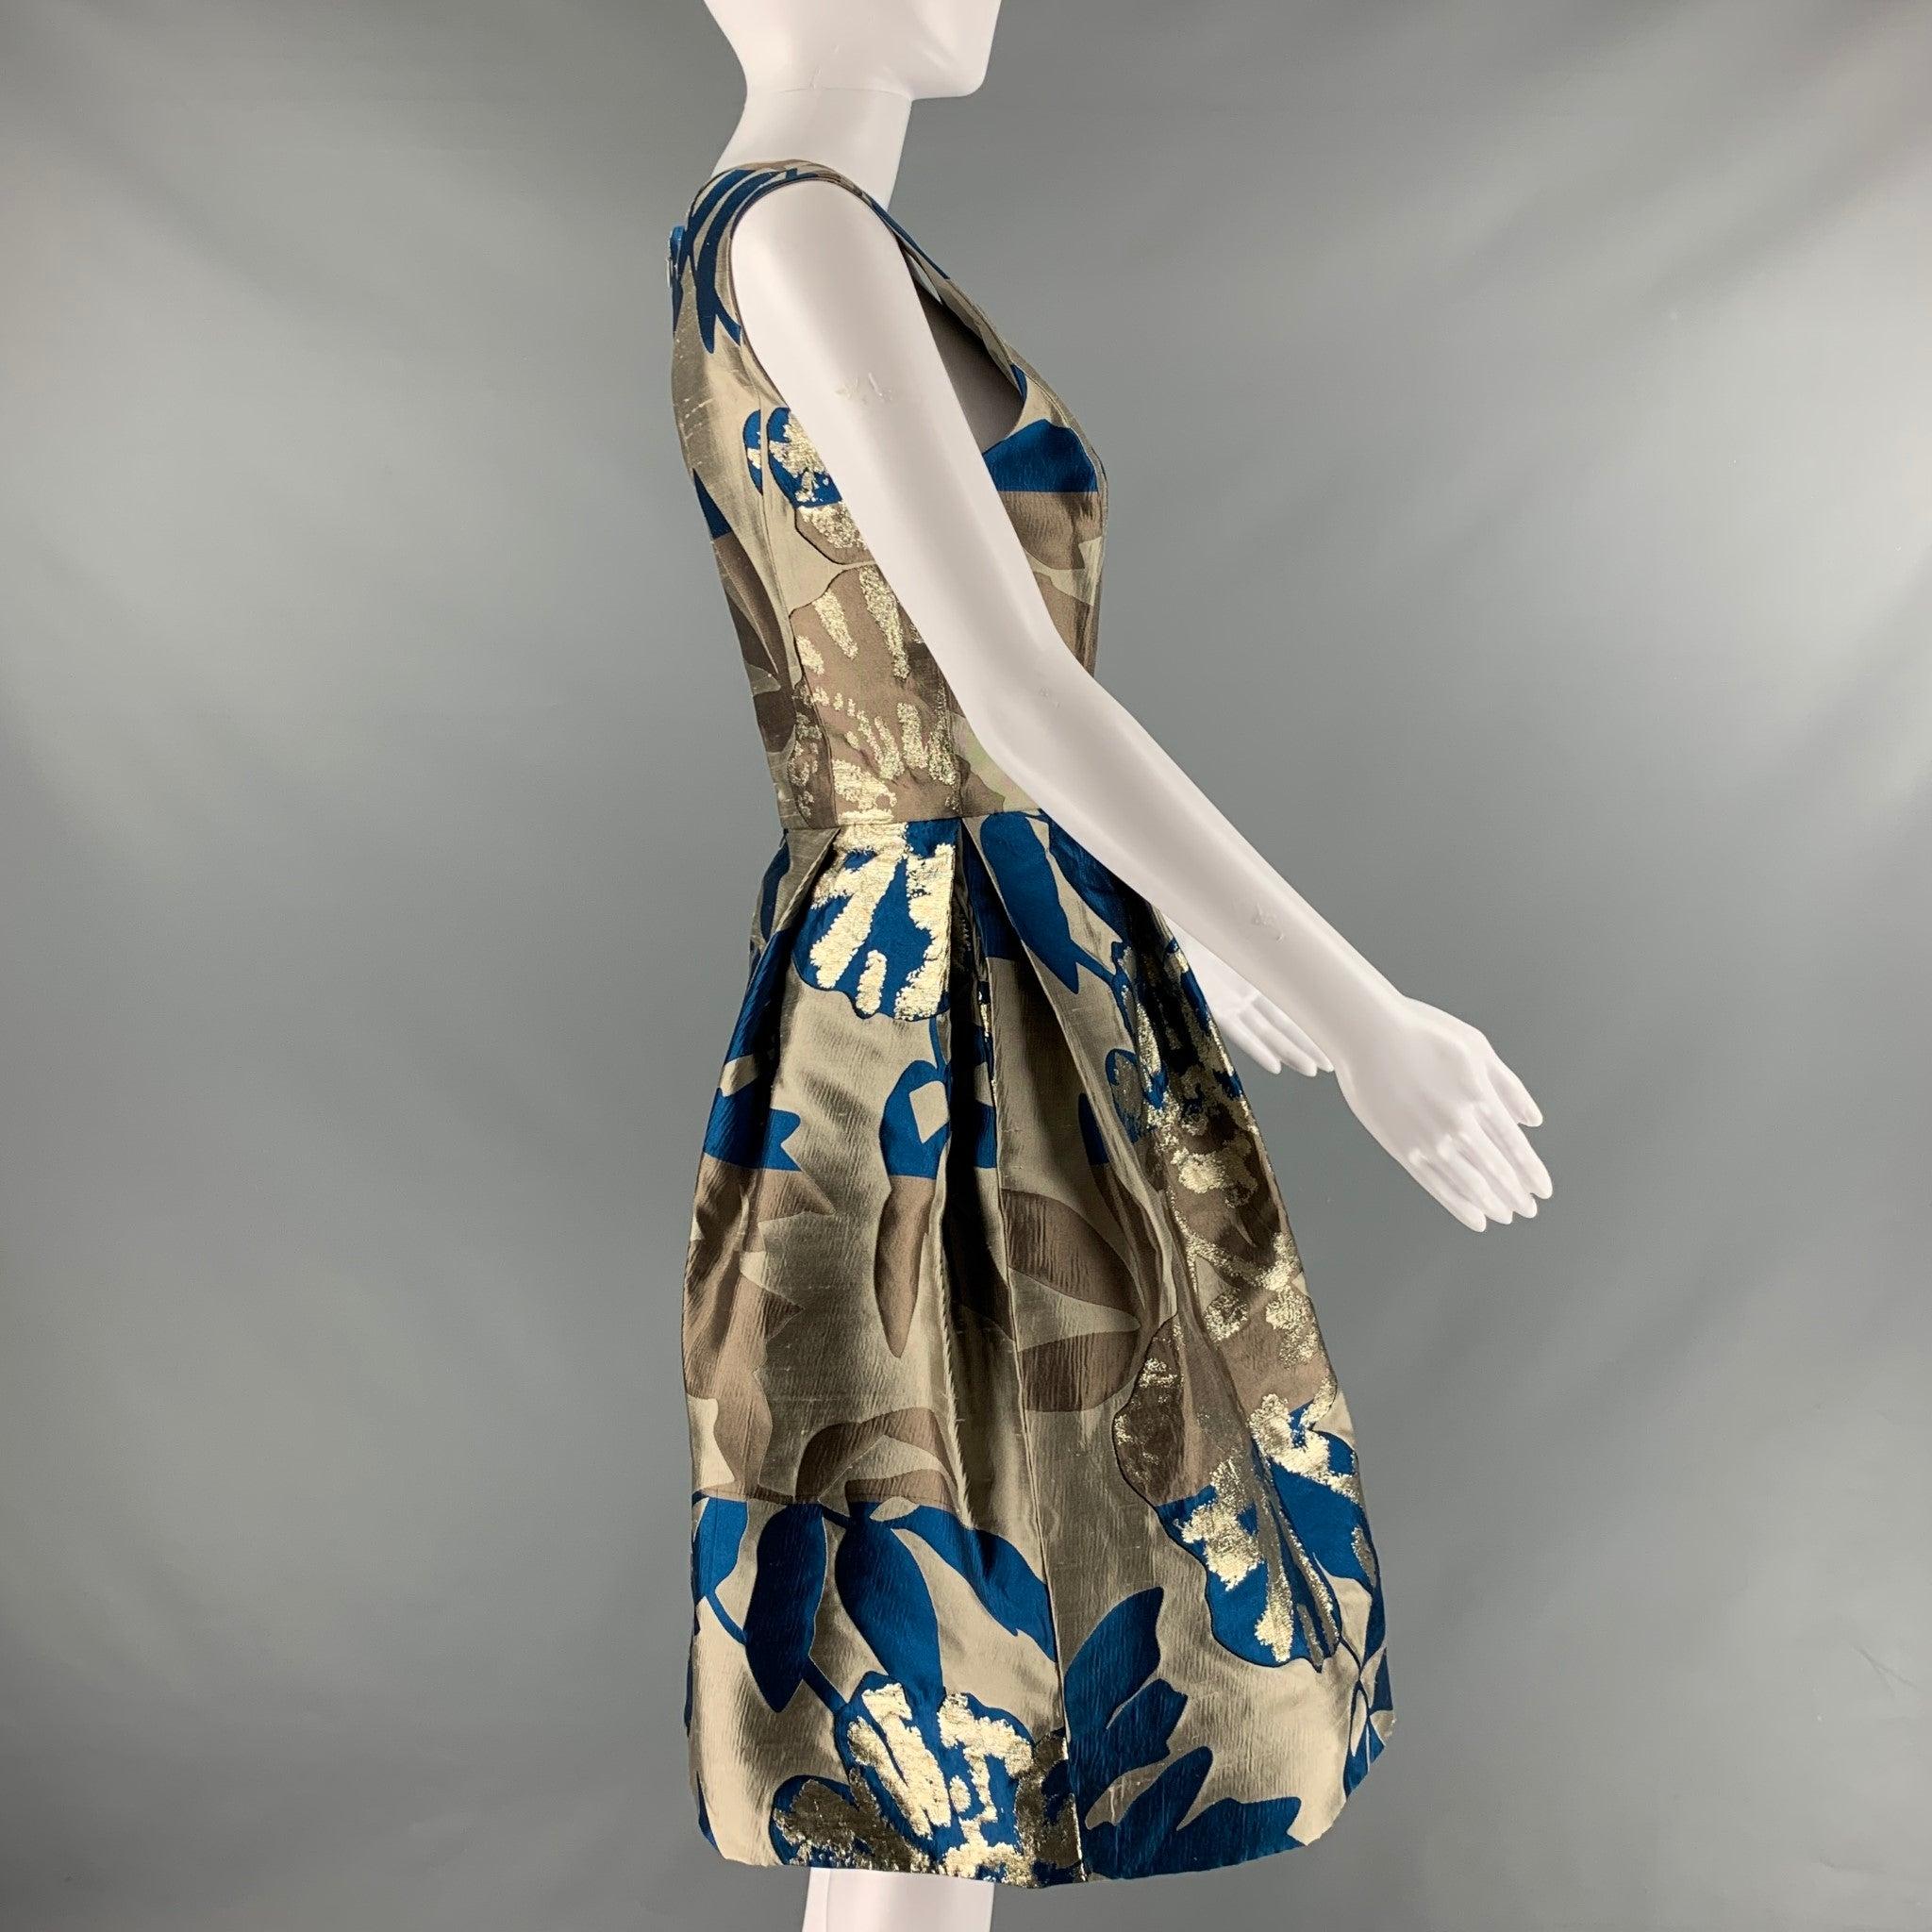 OSCAR DE LA RENTA S'09 cocktail dress comes in a taupe and blue floral silk and polyester jacquard featuring a round neckline, and pleated A line skirt with pockets. Made in USA.Excellent Pre-Owned Condition. 

Marked:  8 

Measurements: 
